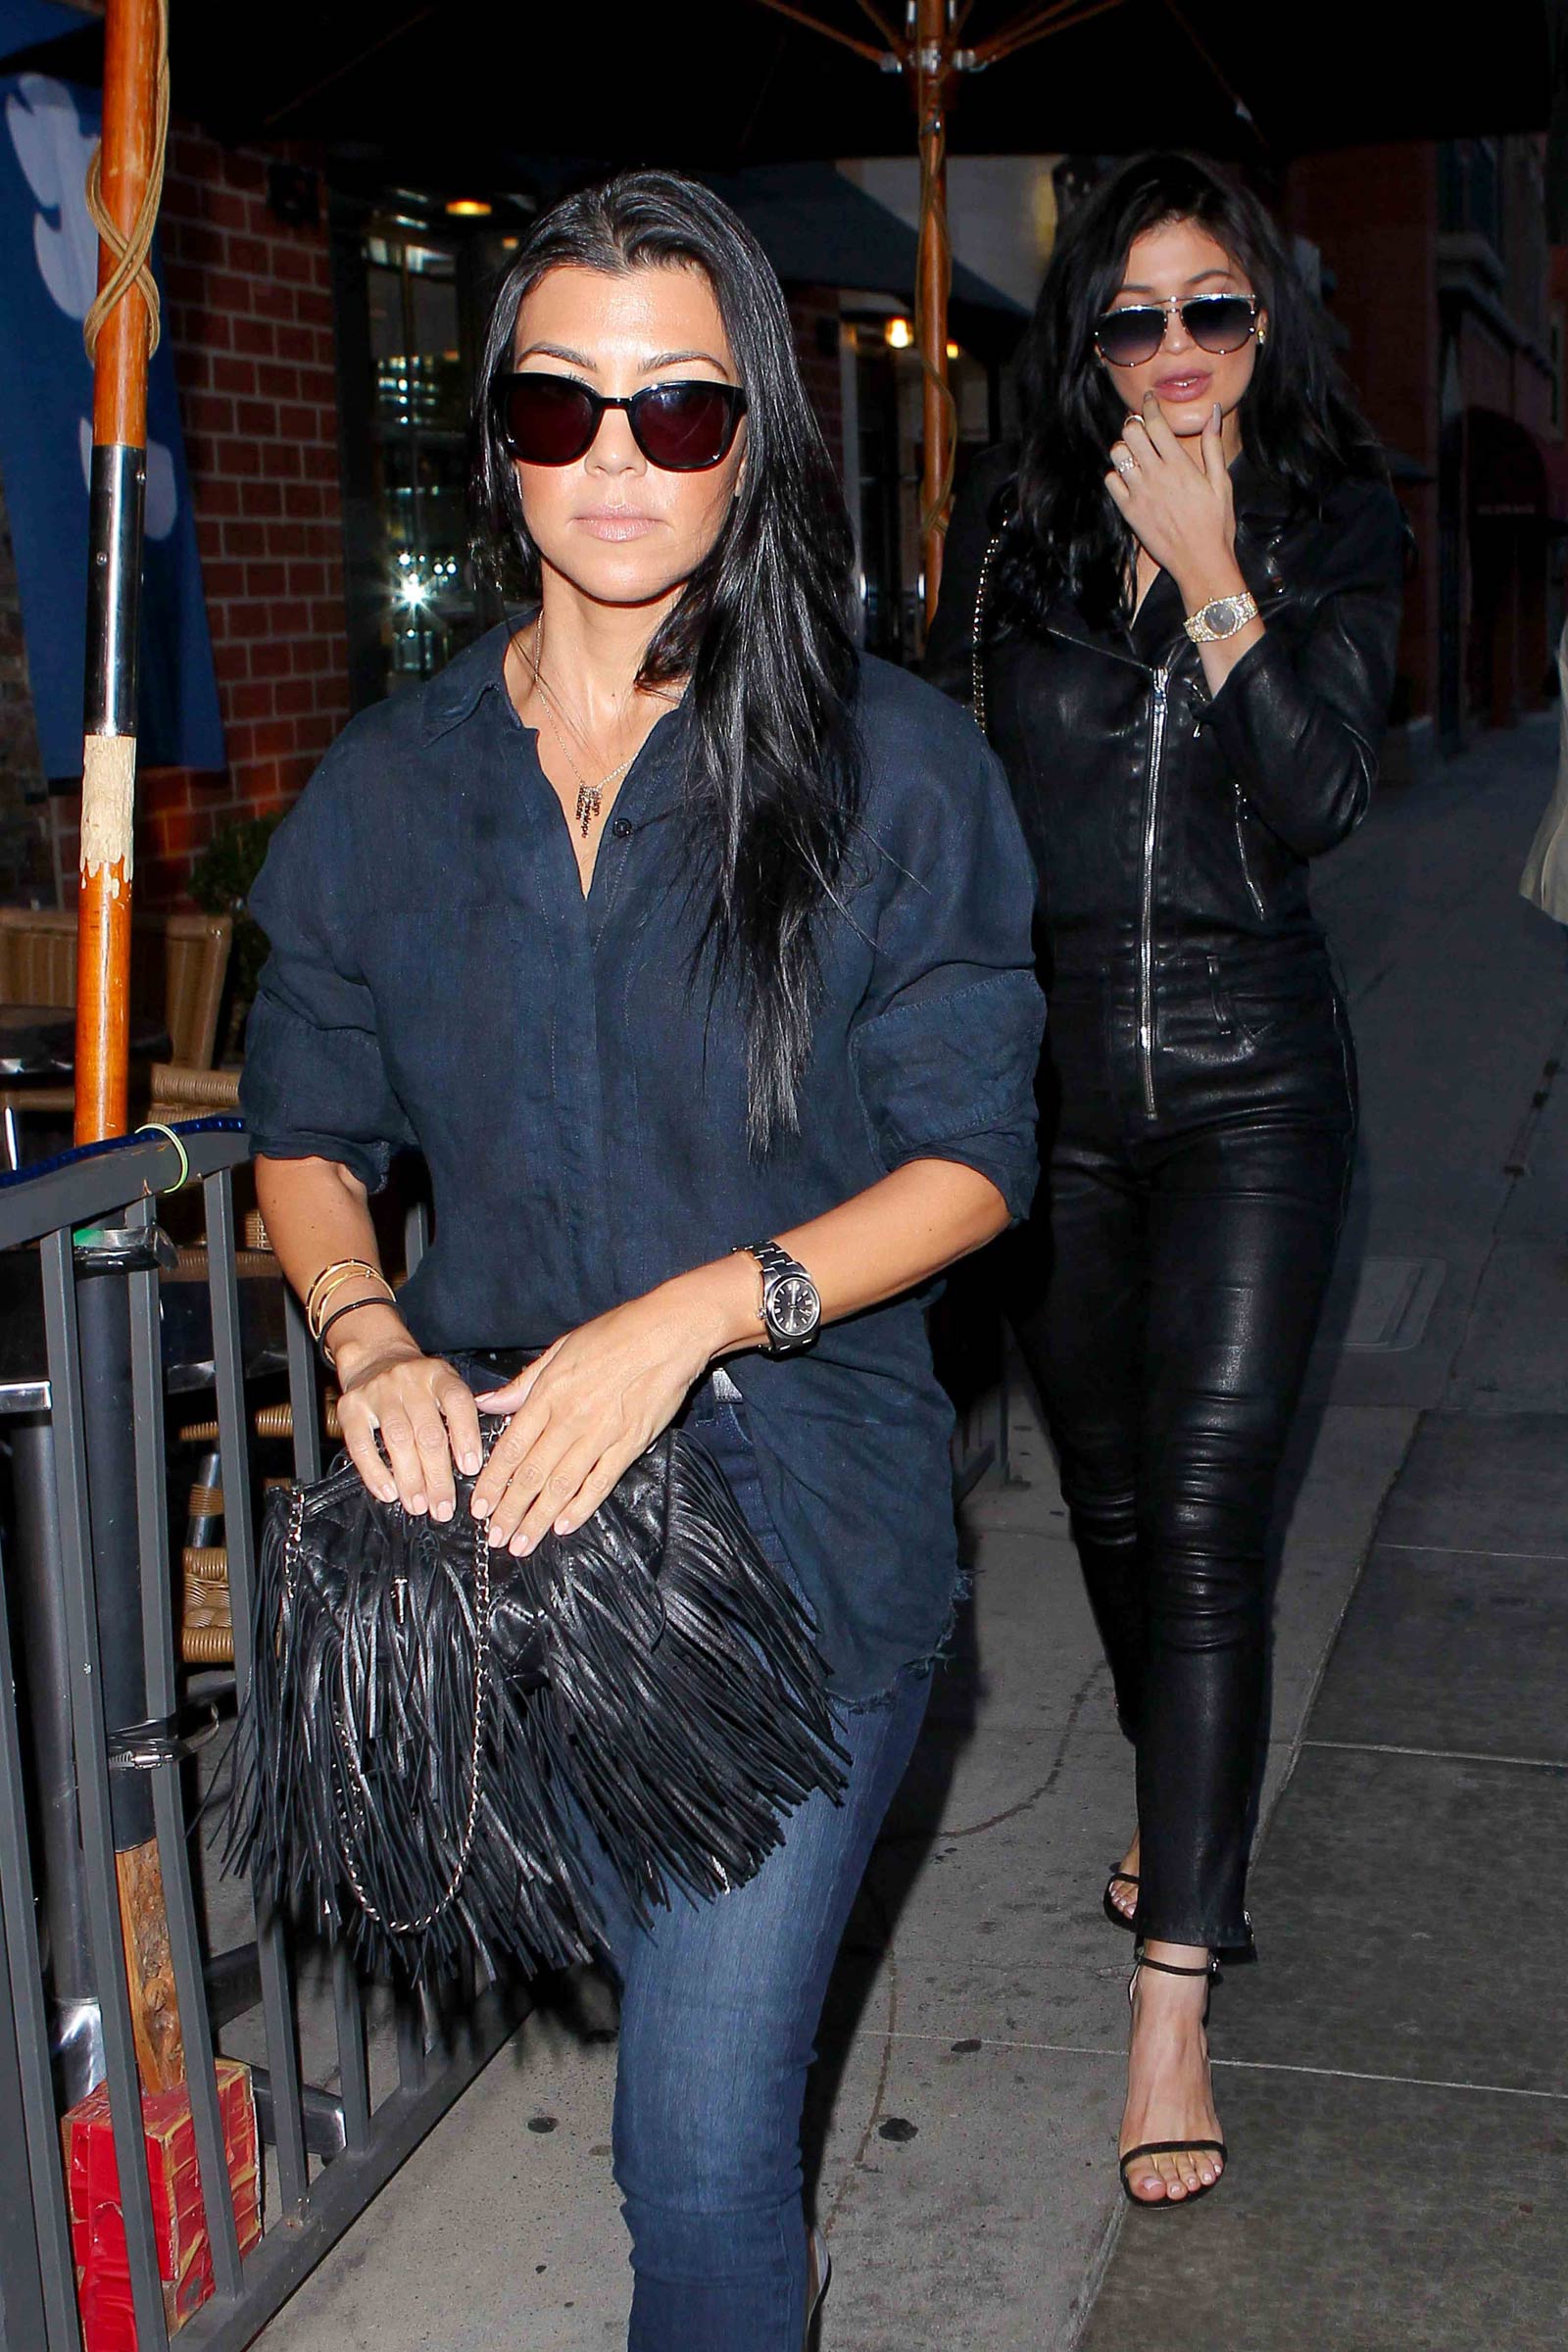 Kylie Jenner and Kourtney Kardashian out in Beverly Hills